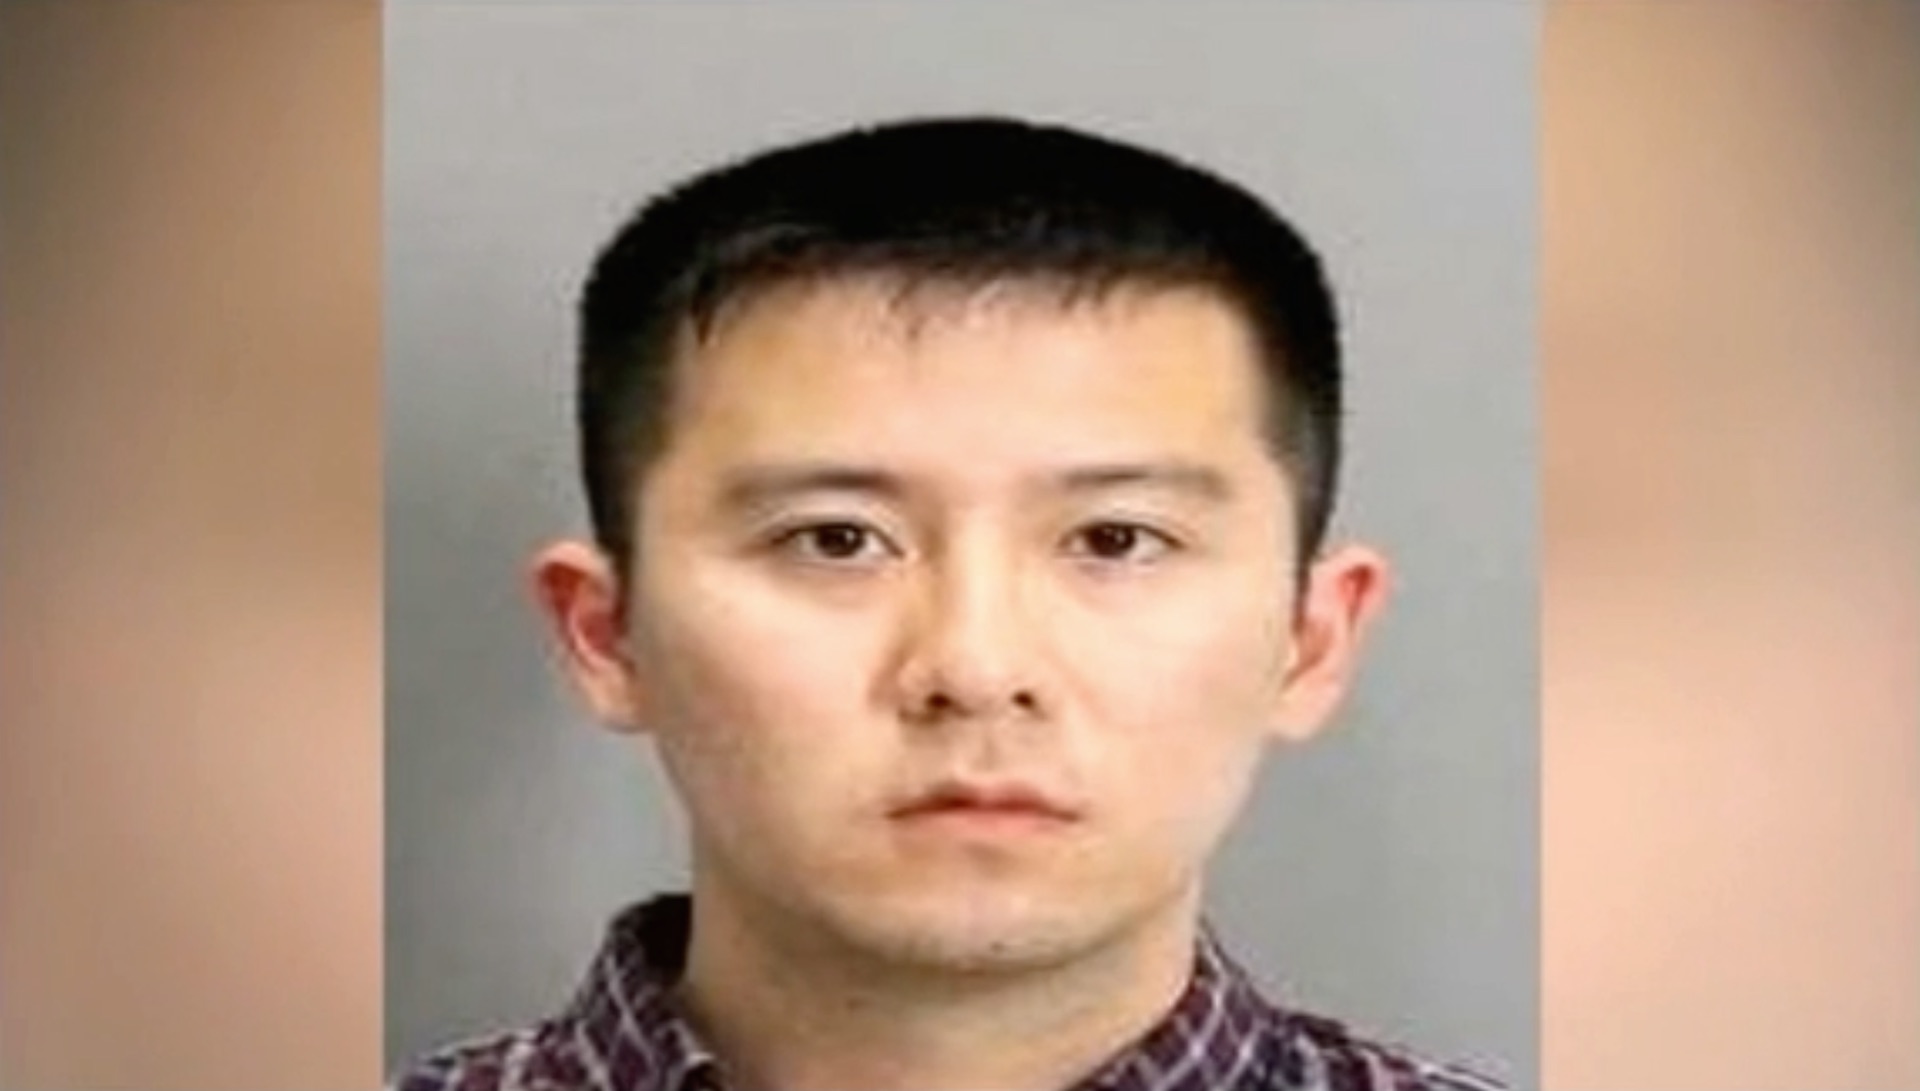 Student Teacher Sex Download - At school, he was the 'cool' teacher. Online, police say, he was a student-seducing  porn star. - The Washington Post